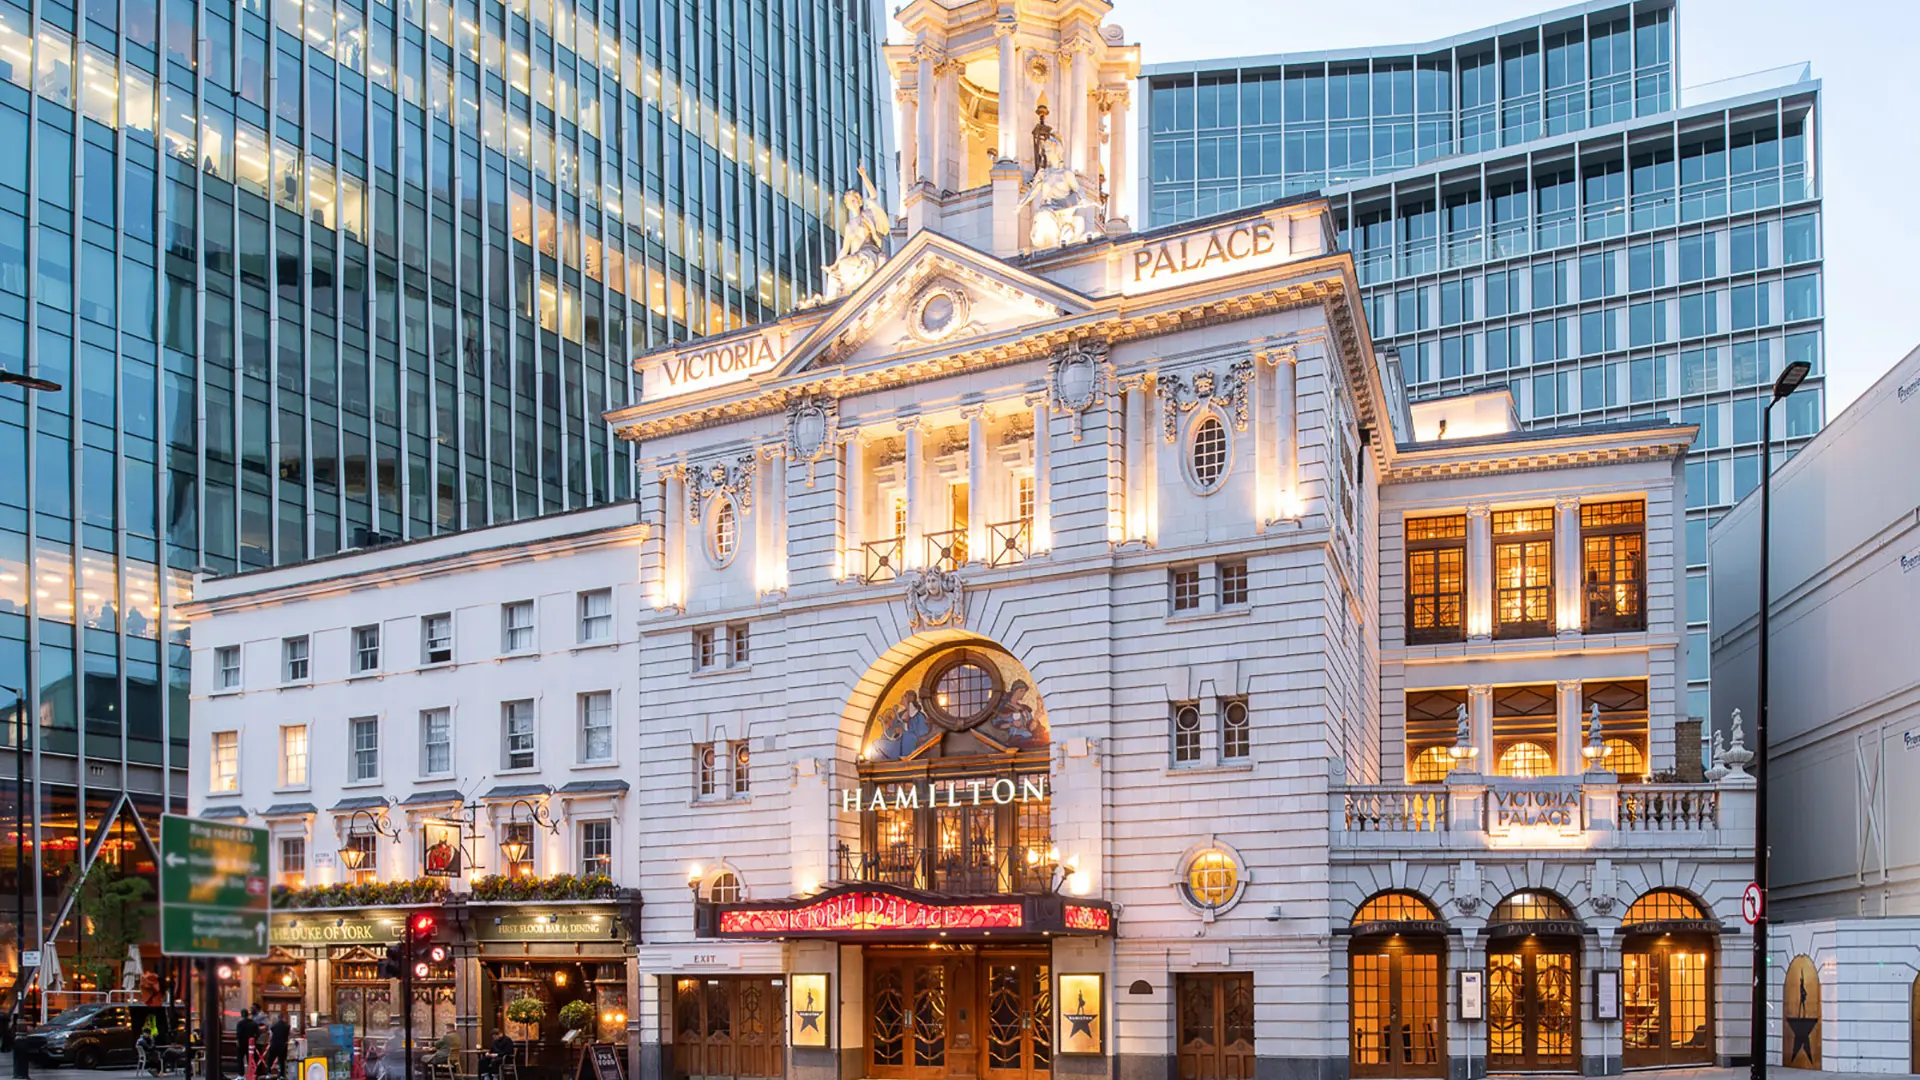 Victoria Palace Theatre external view with their lights on